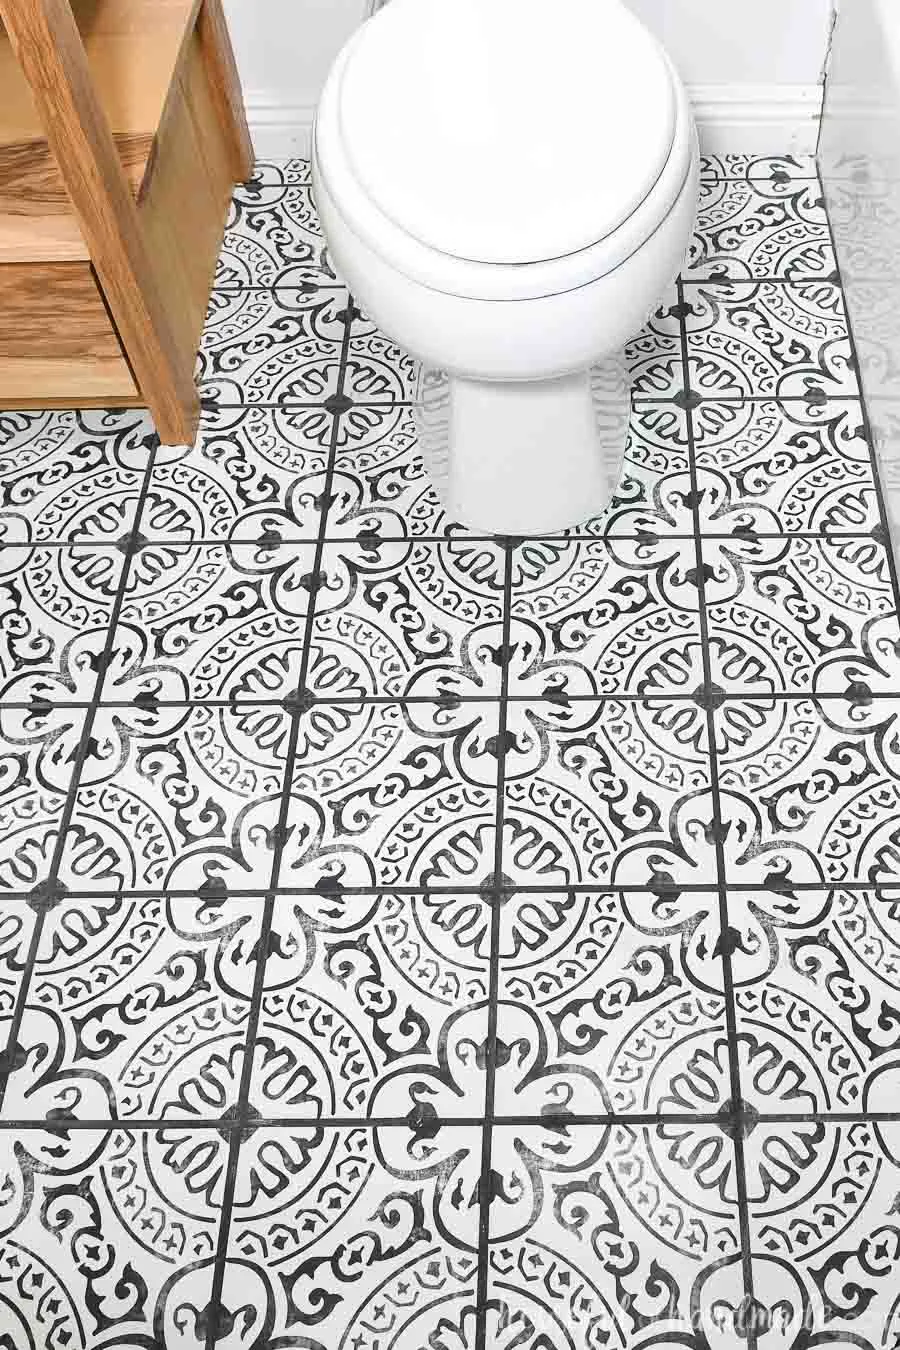 Laying Floor Tiles In A Small Bathroom, Bathroom Tile Patterns